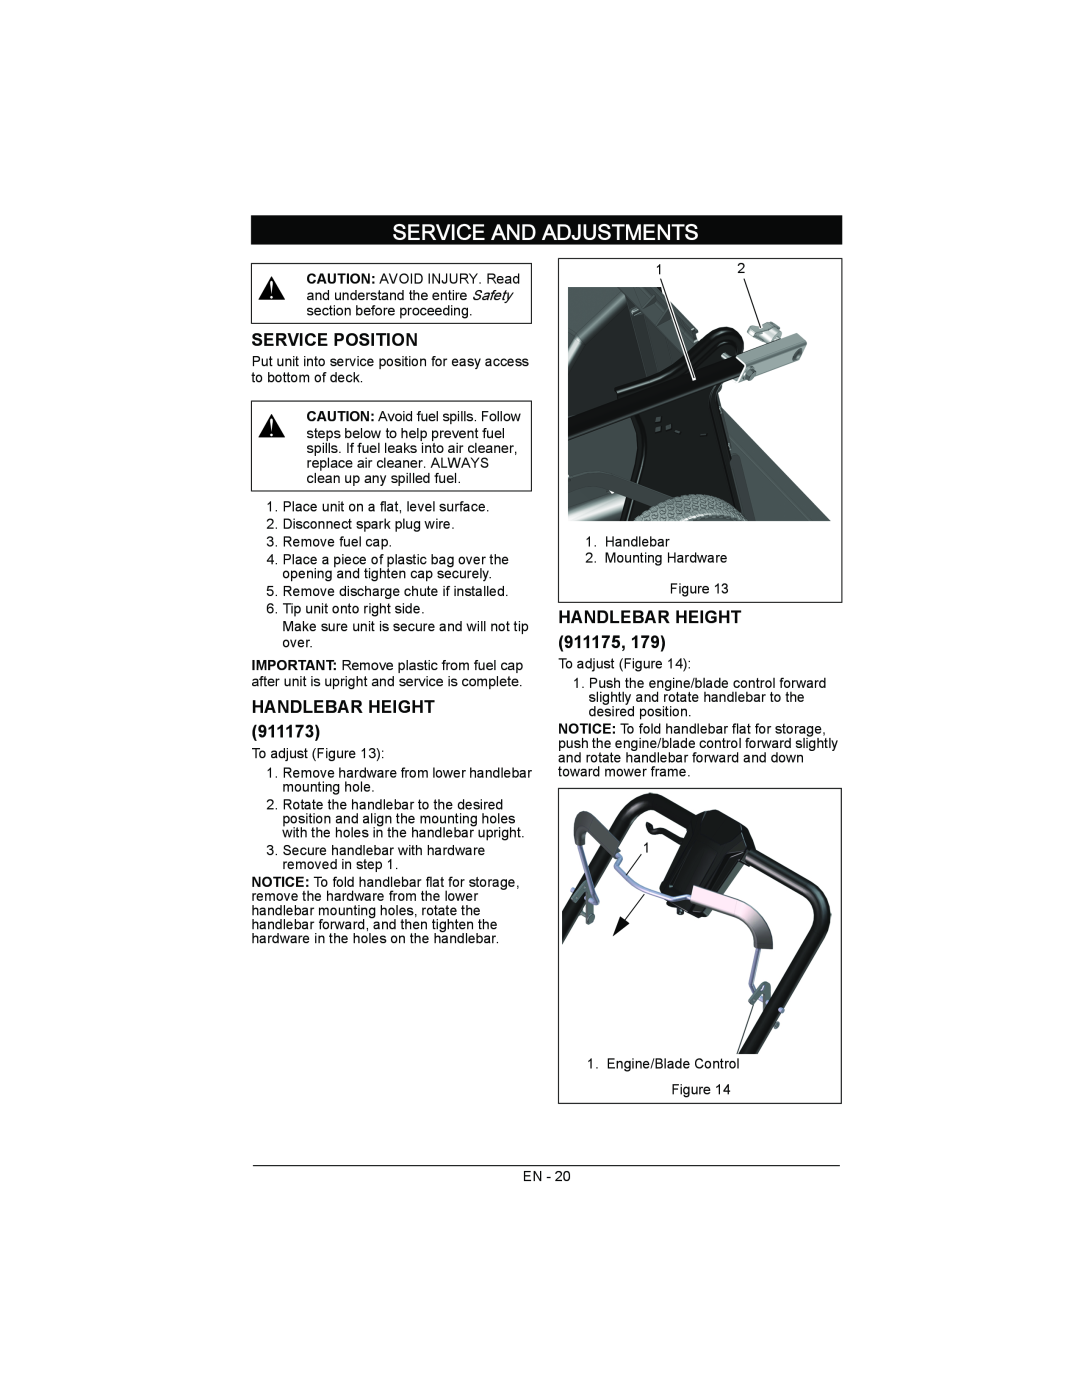 Ariens 911173, 911179, 911175 warranty Service And Adjustments, Service Position, Handlebar Height 